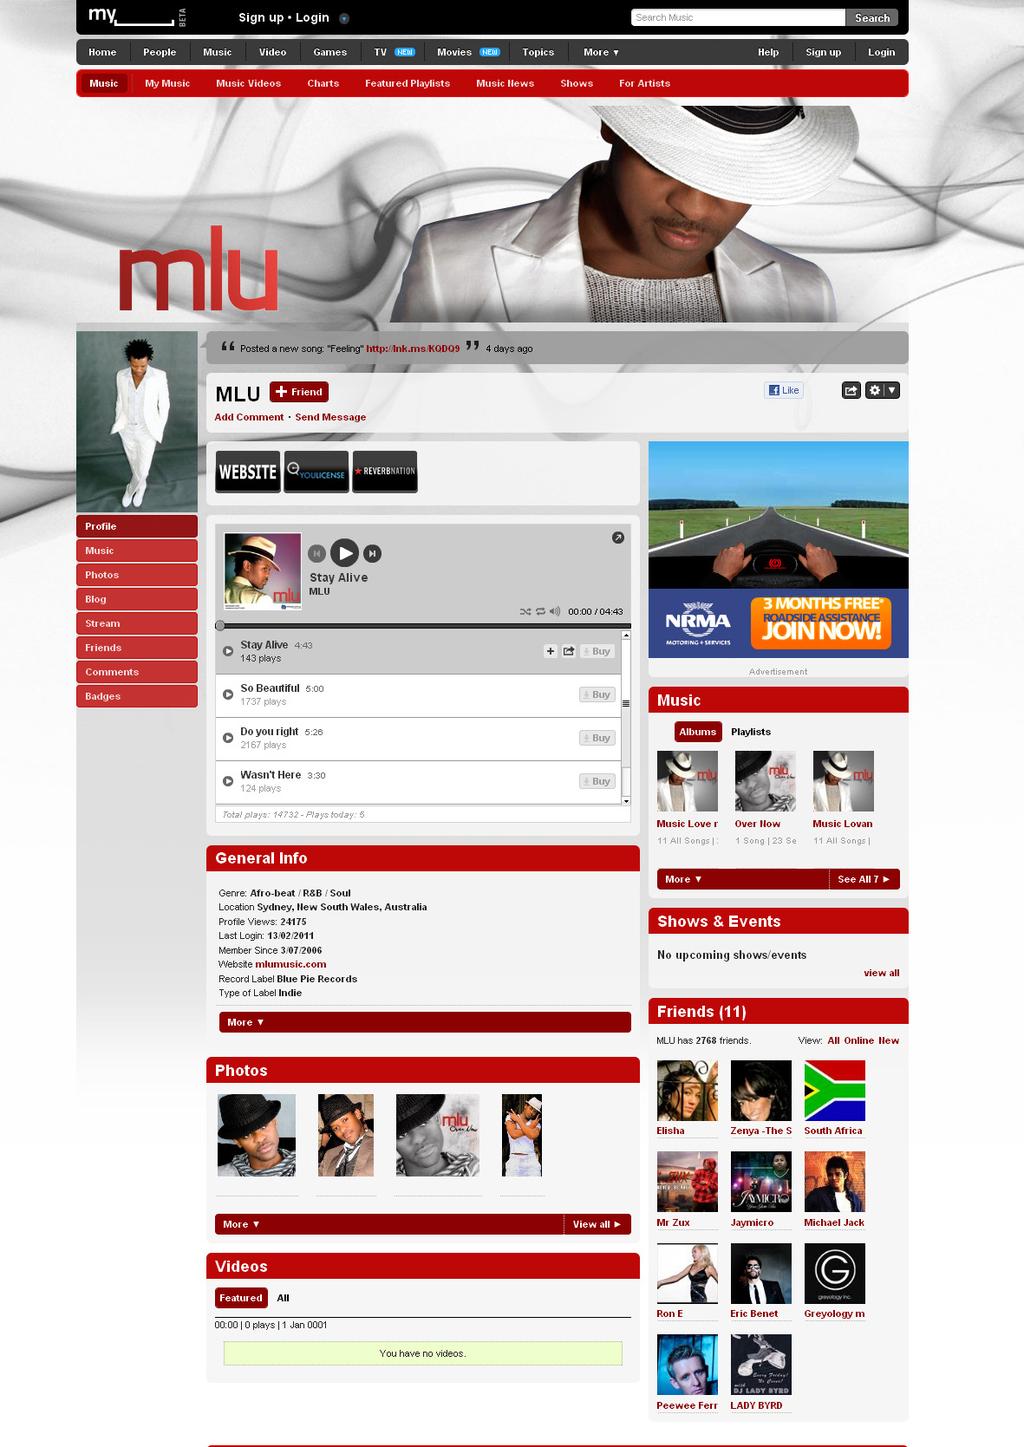 MYSPACE SITE MLU MySpace Site Custom Header Representing the Artist All Tracks Uploaded to MySpace for Fans to Listen General Information on the Artist, Website Links, Music